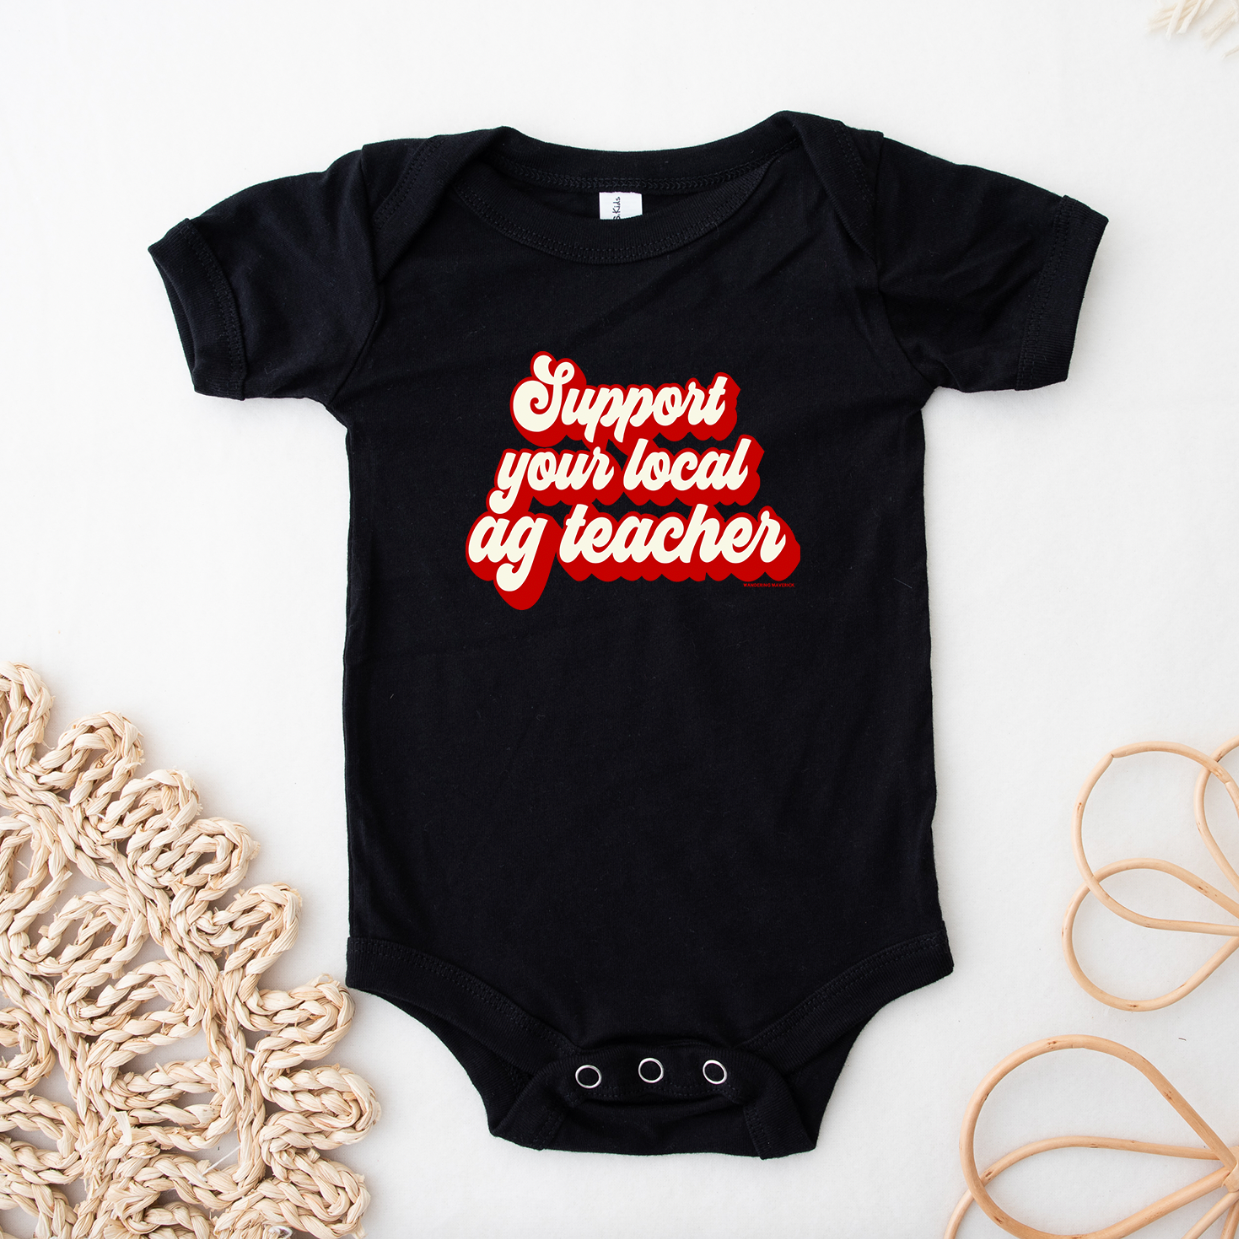 Retro Support Your Local Ag Teacher Red One Piece/T-Shirt (Newborn - Youth XL) - Multiple Colors!